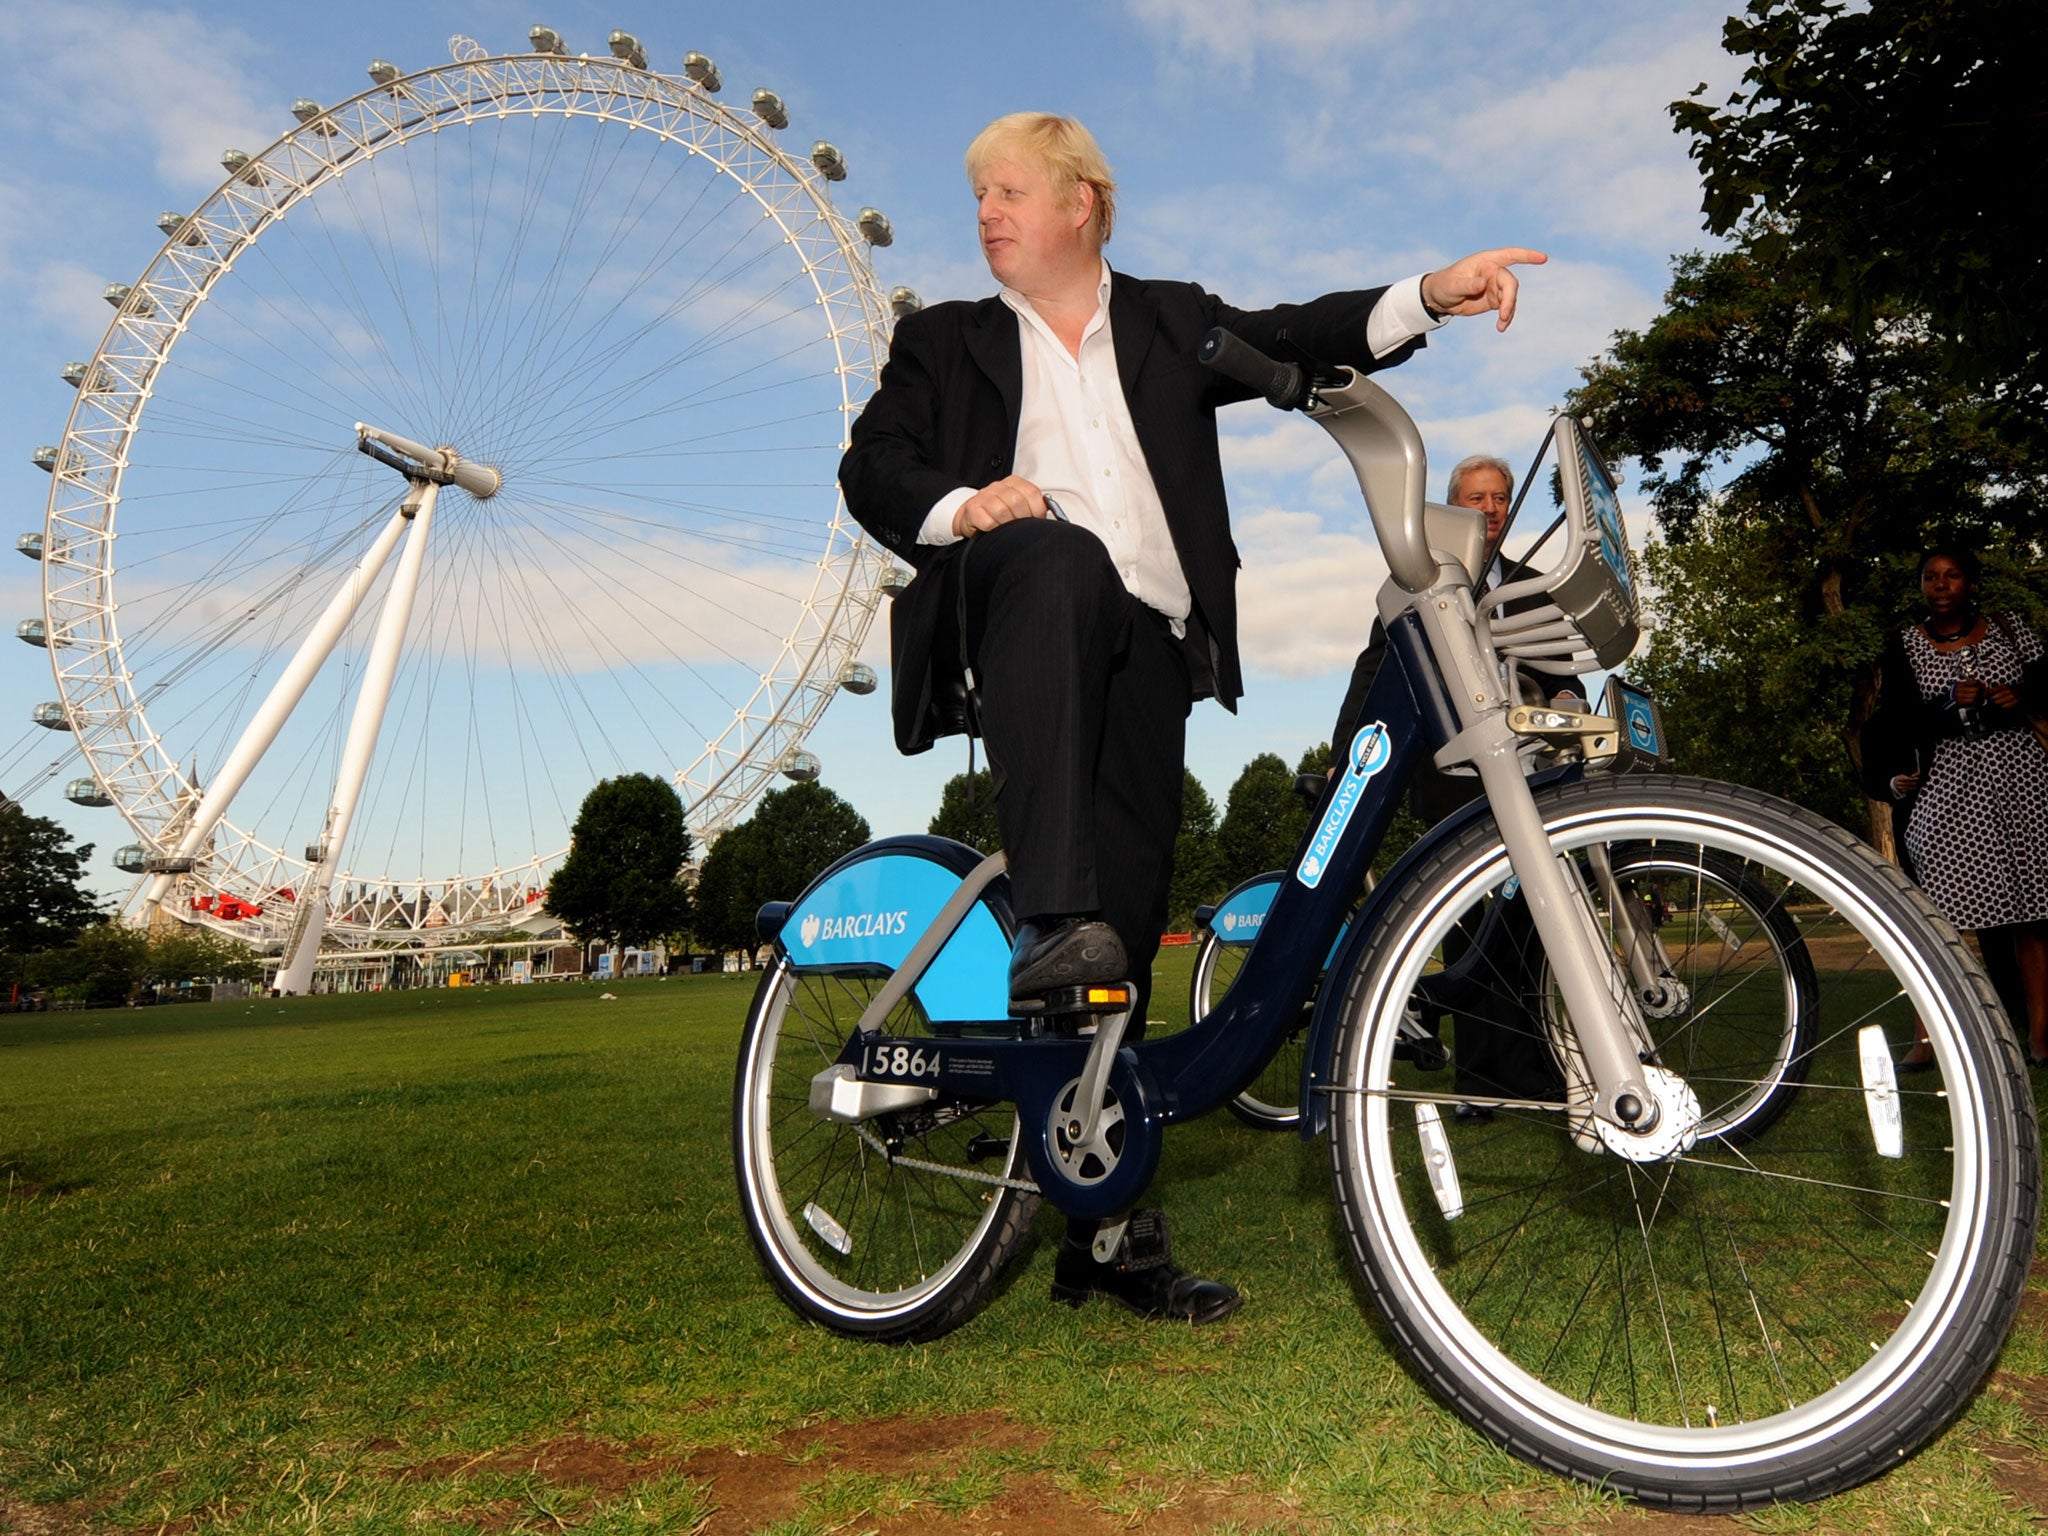 Mayor of London, Boris Johnson, poses for photographs during the launch of the London Cycle Hire bicycle scheme in central London, on July 30, 2010.